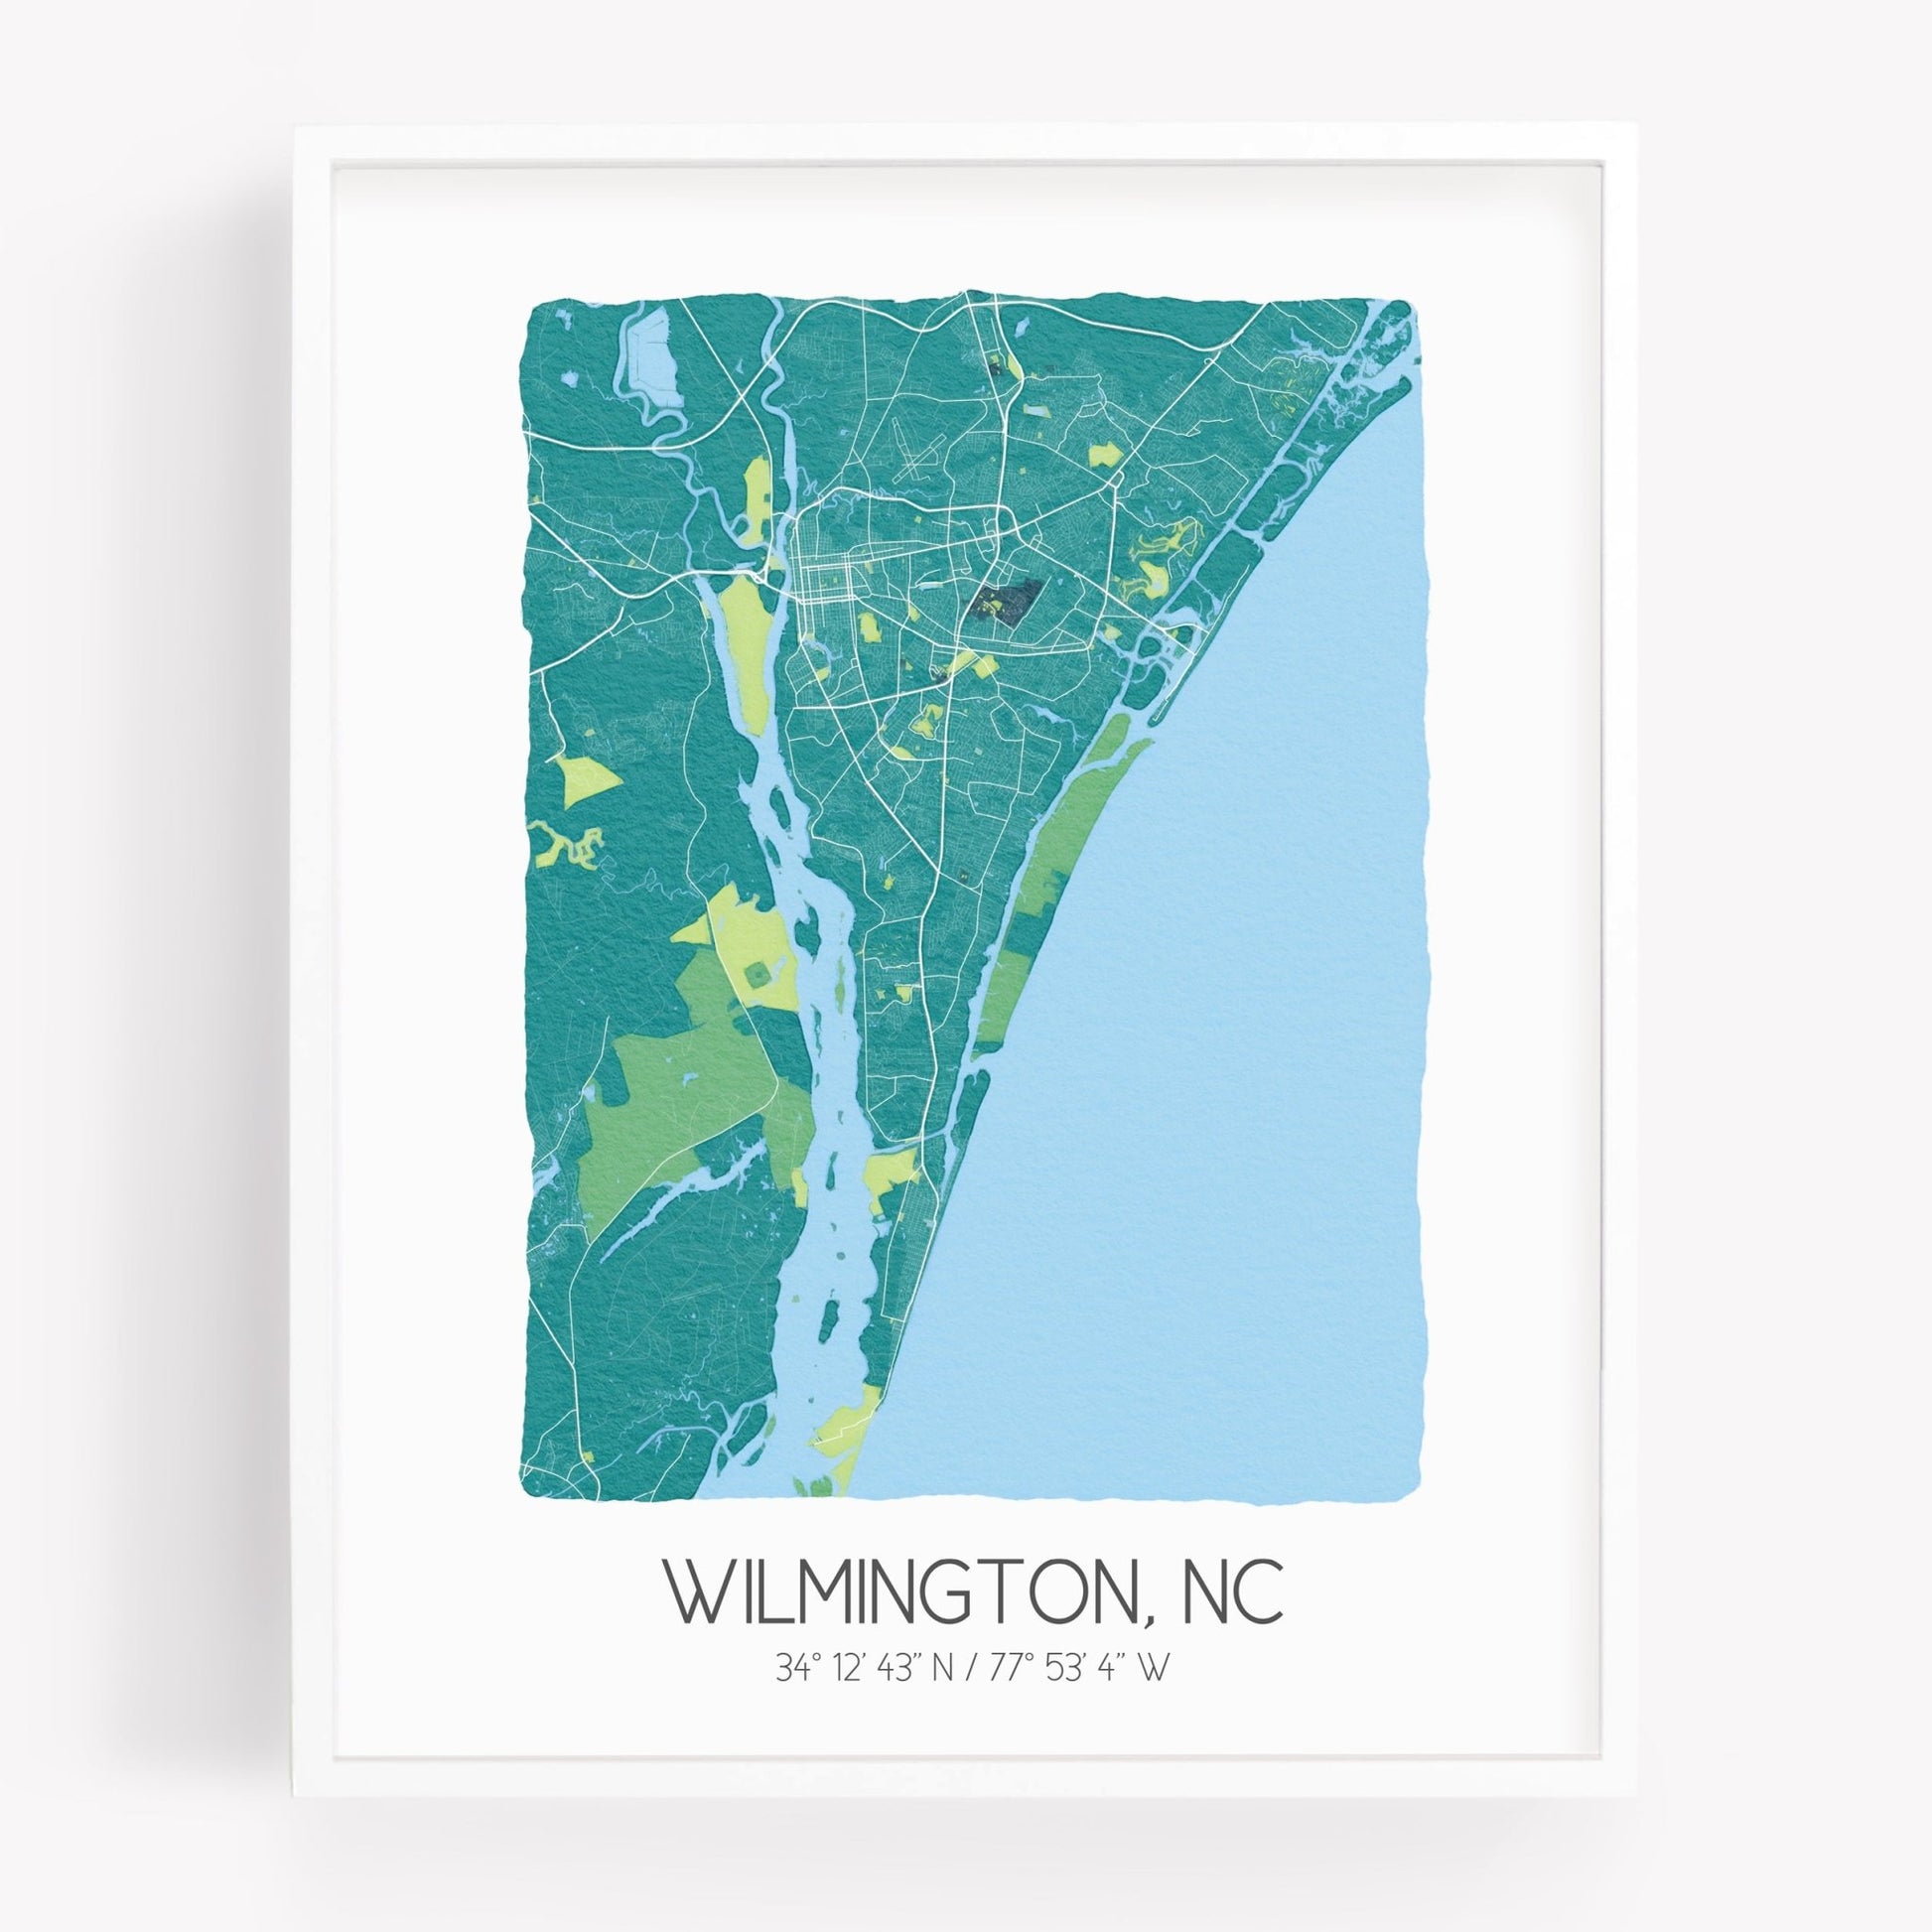 A city map print of Wilmington North Carolina, in the color teal